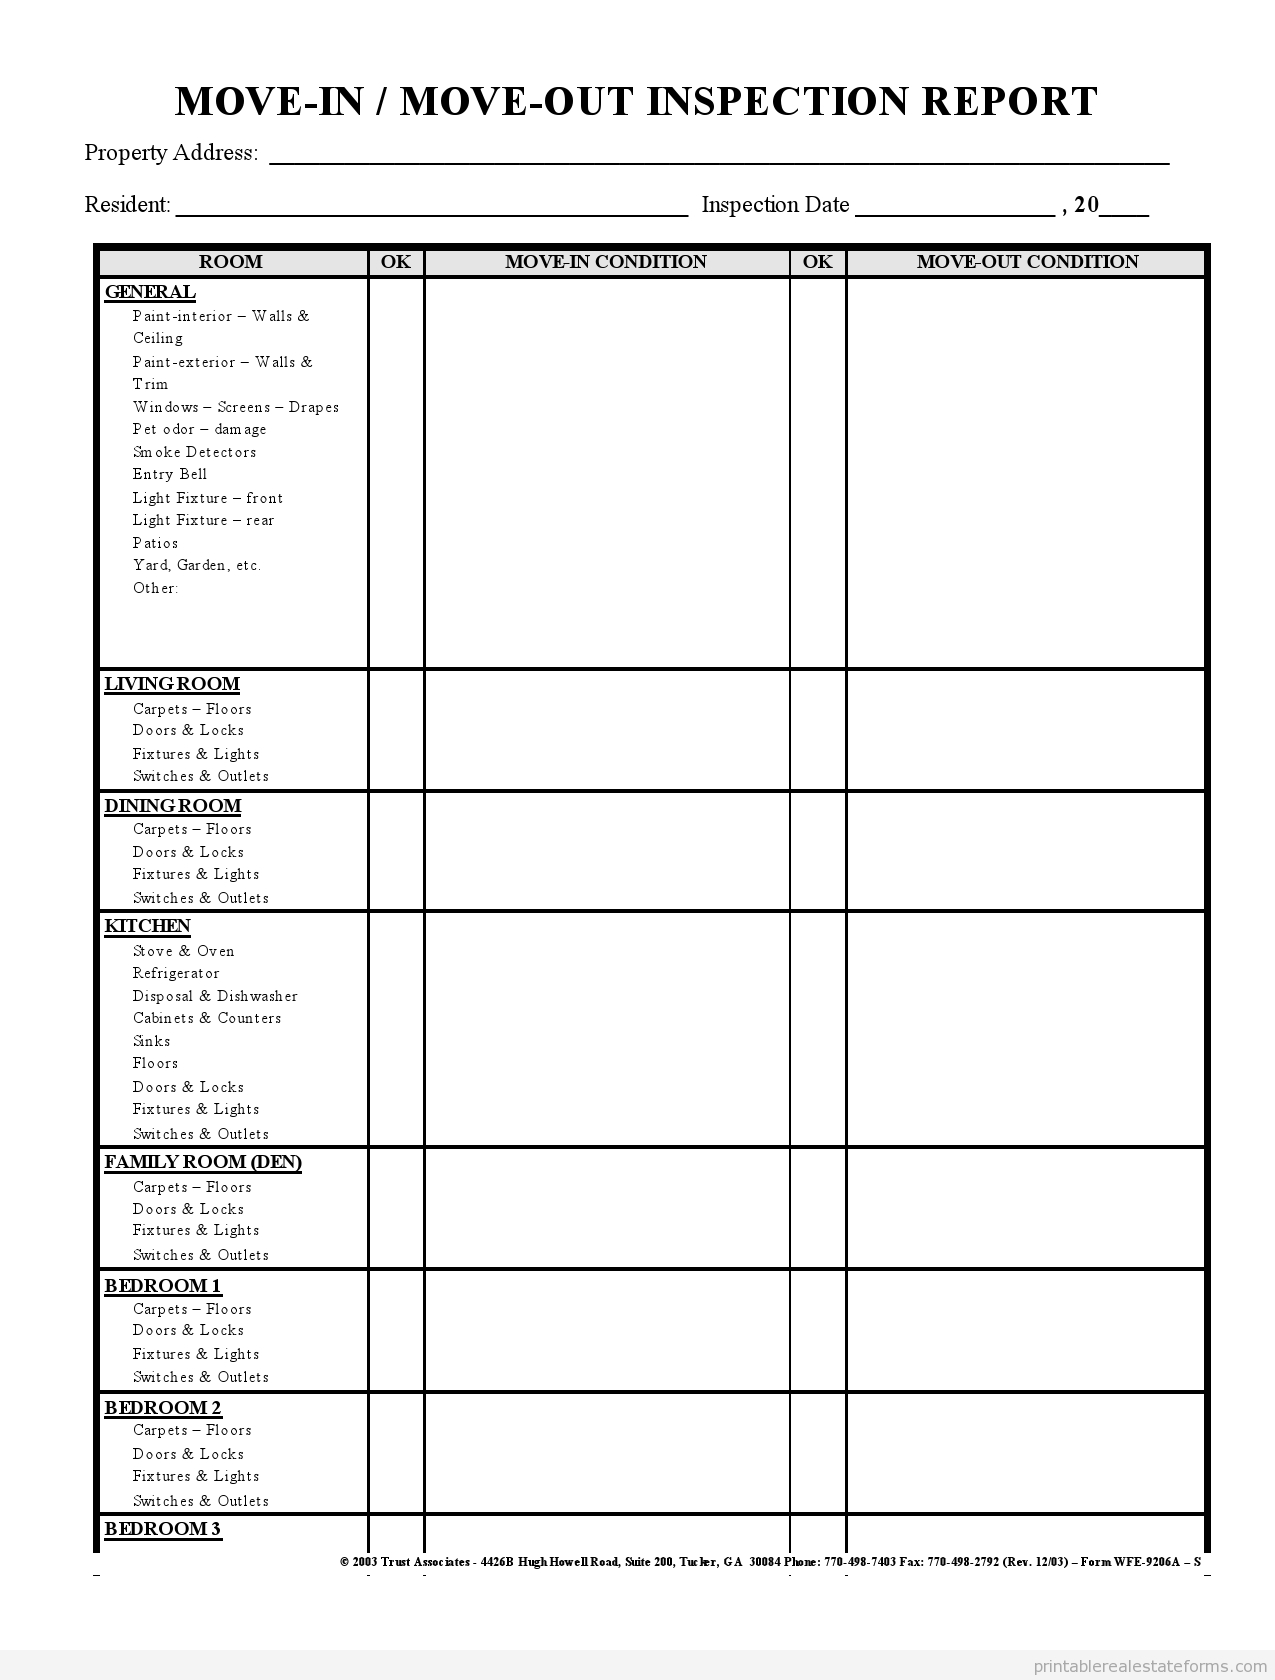 Sample Printable Move In Move Out Inspection Report Form Regarding Property Management Inspection Report Template